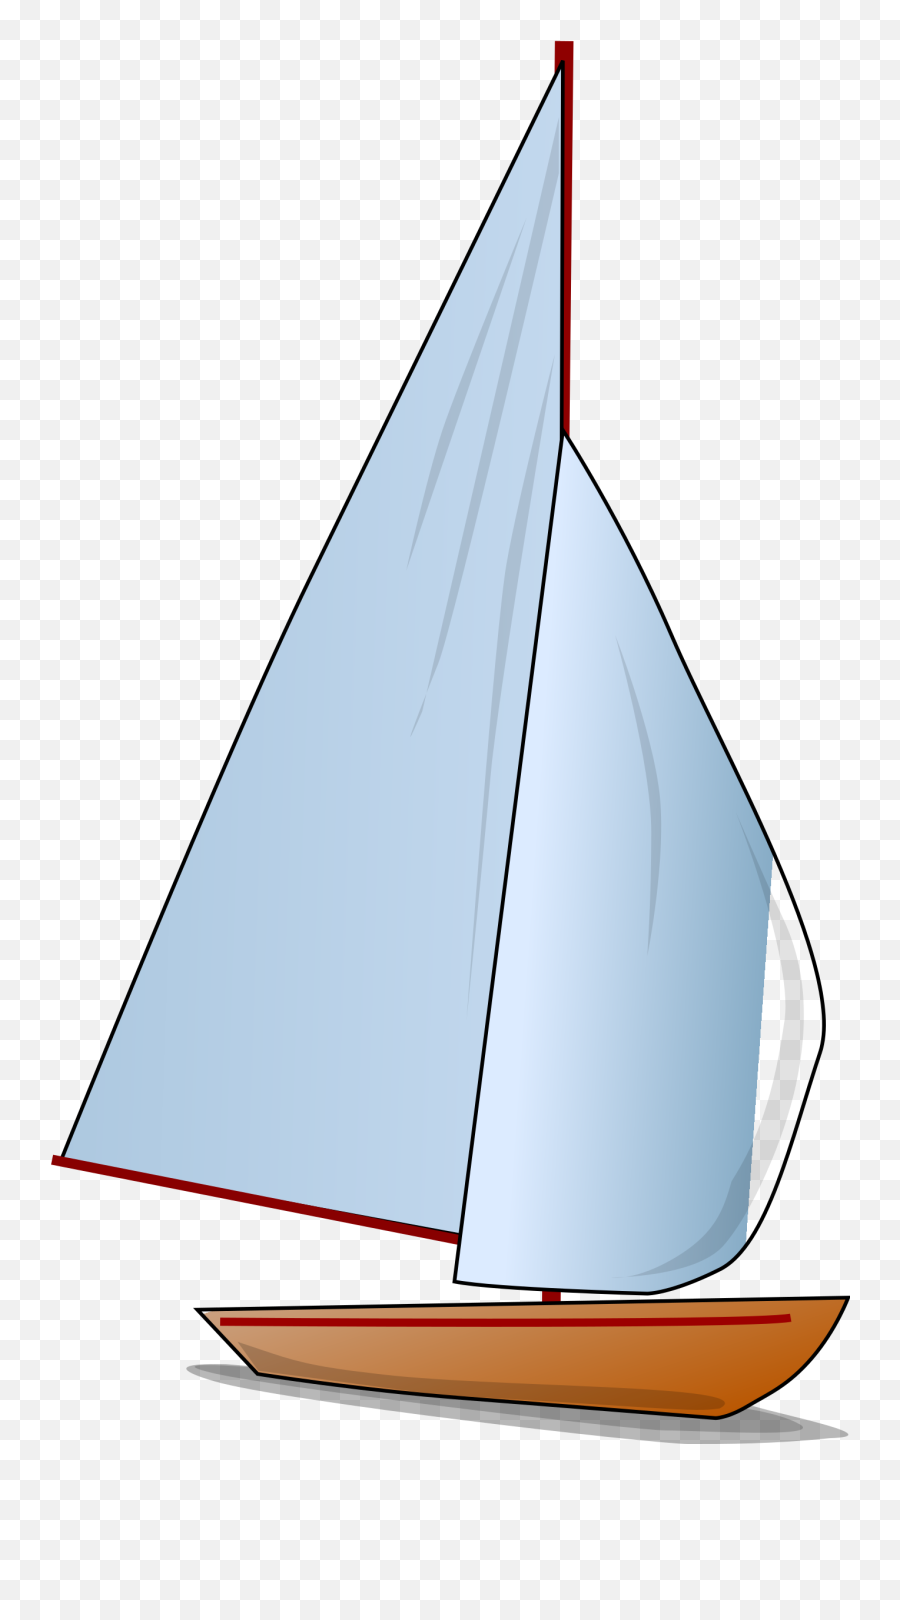 Download Hd Boat Clipart Transparent Png Image - Nicepngcom Boat Clipart Emoji,Boat Clipart